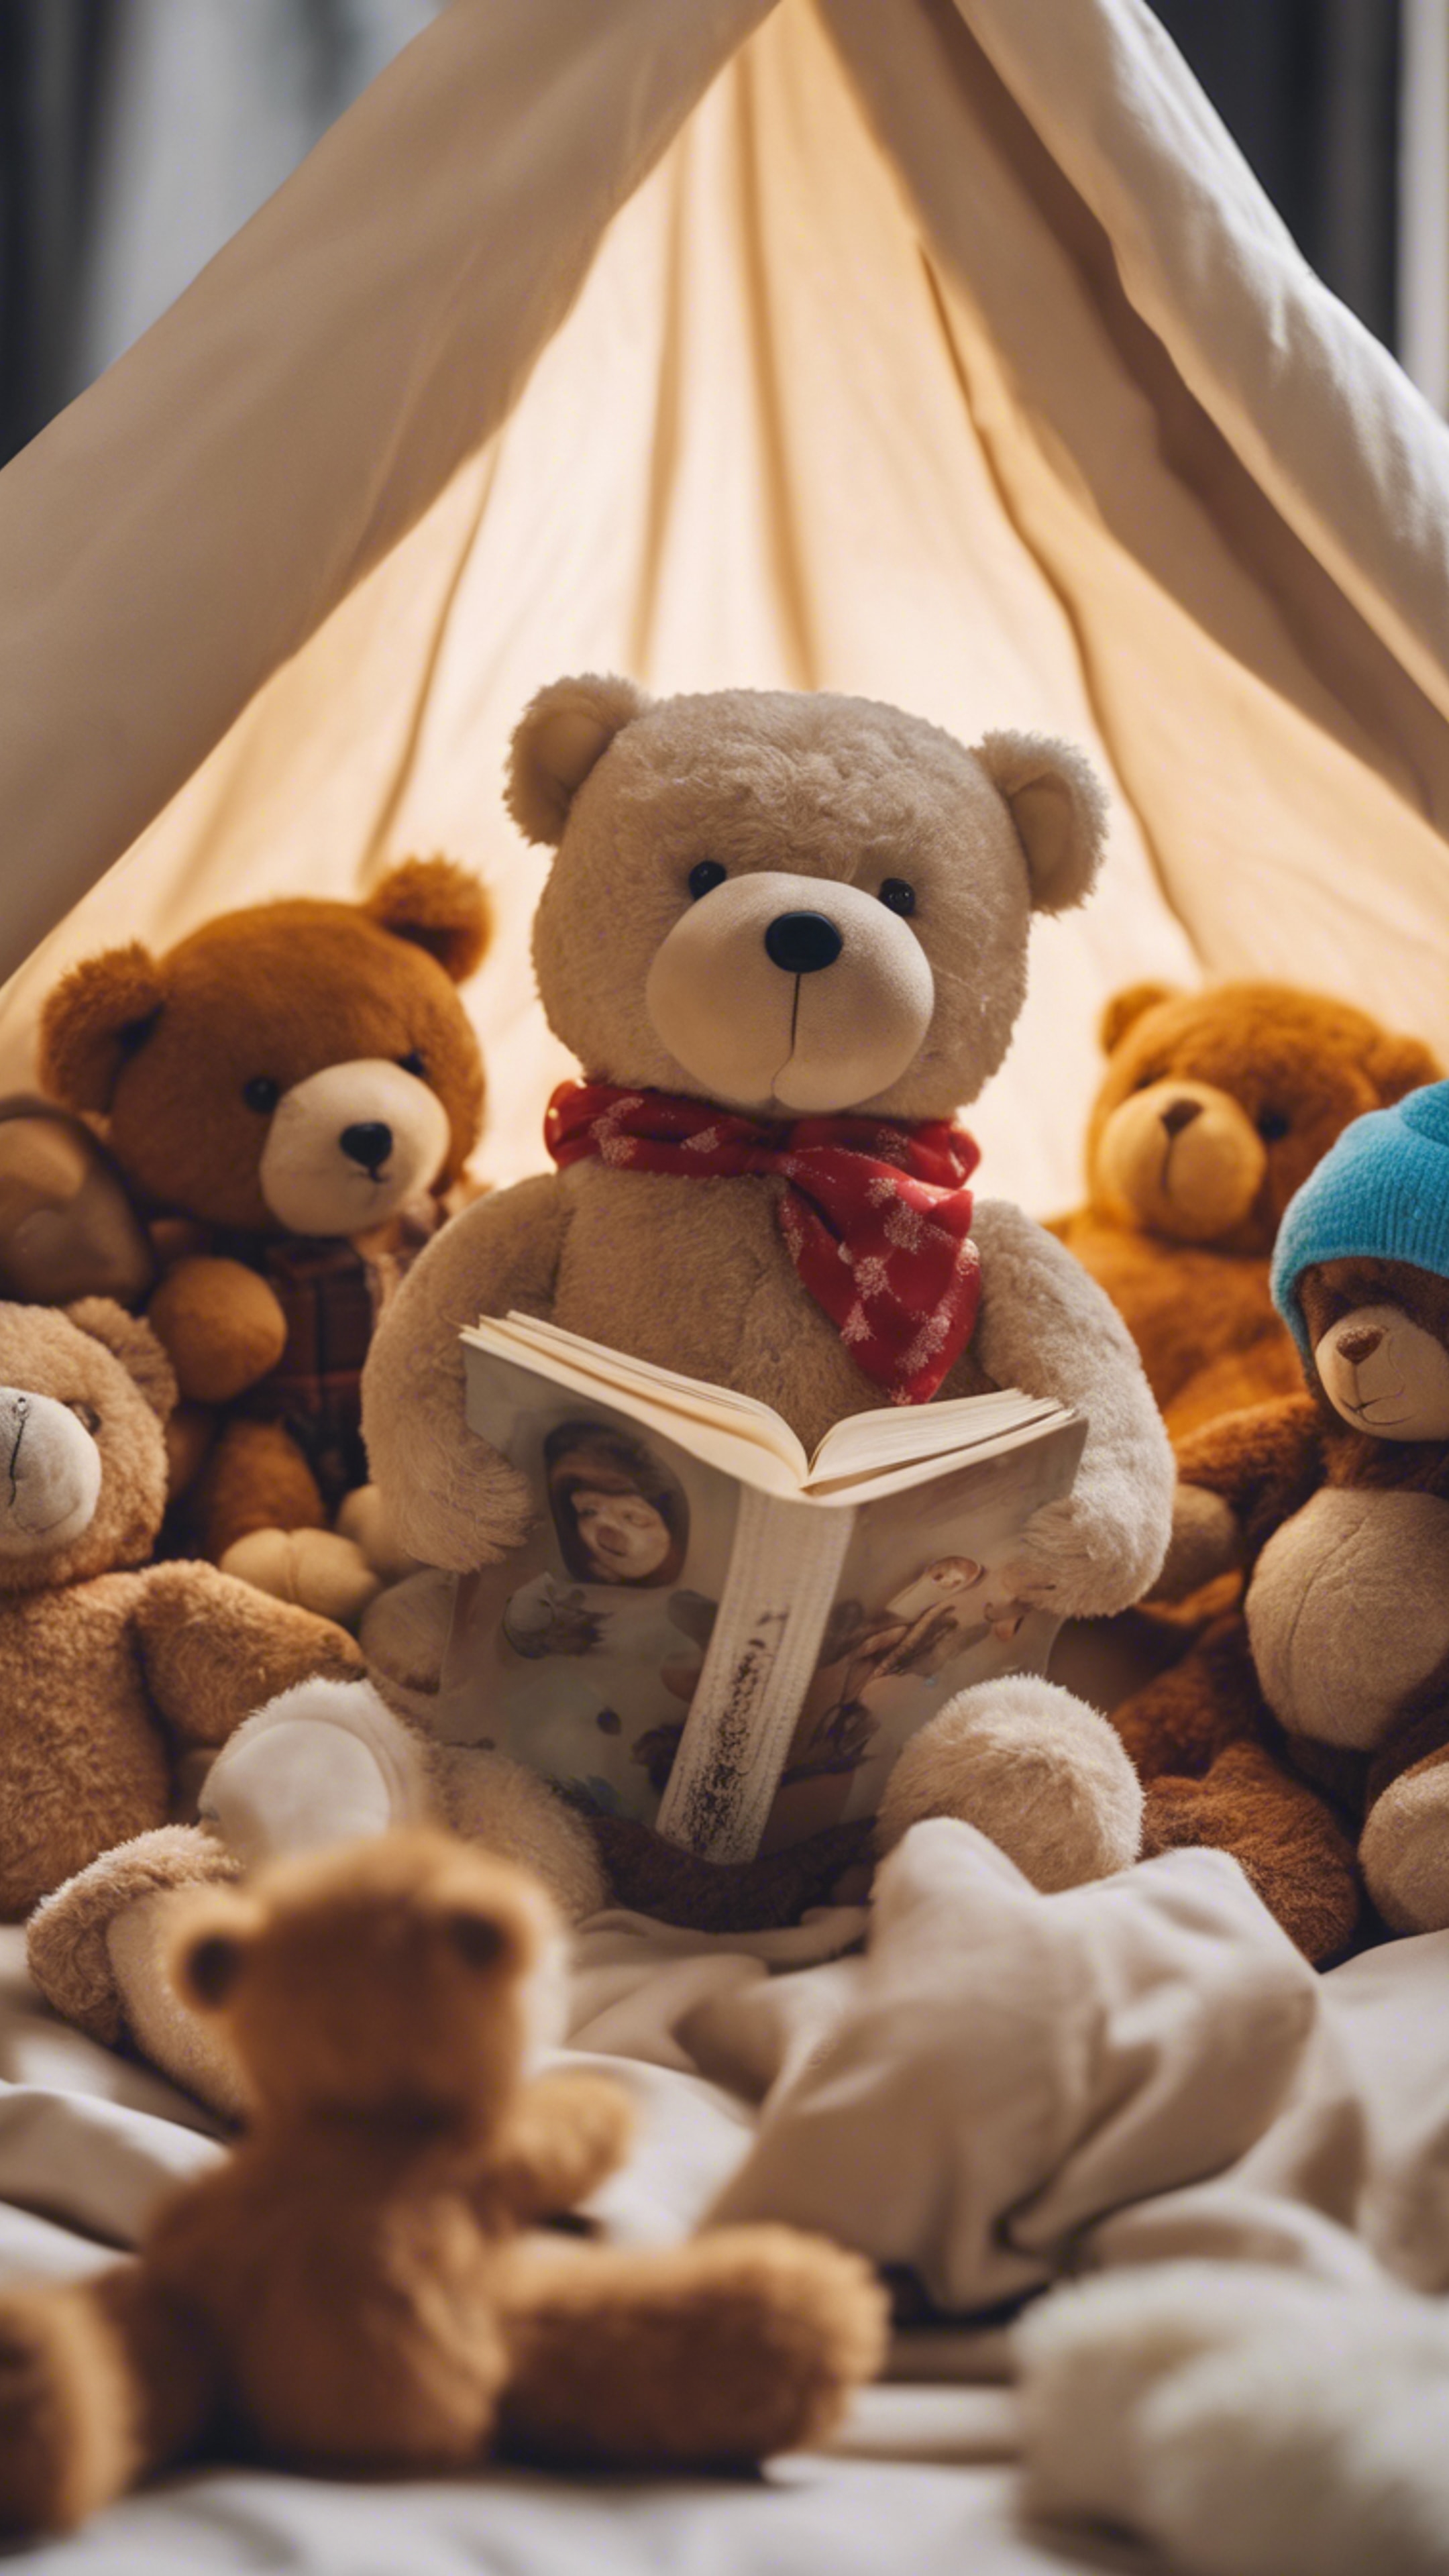 A teddy bear reading a story to a group of animal toys under a blanket fort. Wallpaper[8c29e330caea492dba8f]